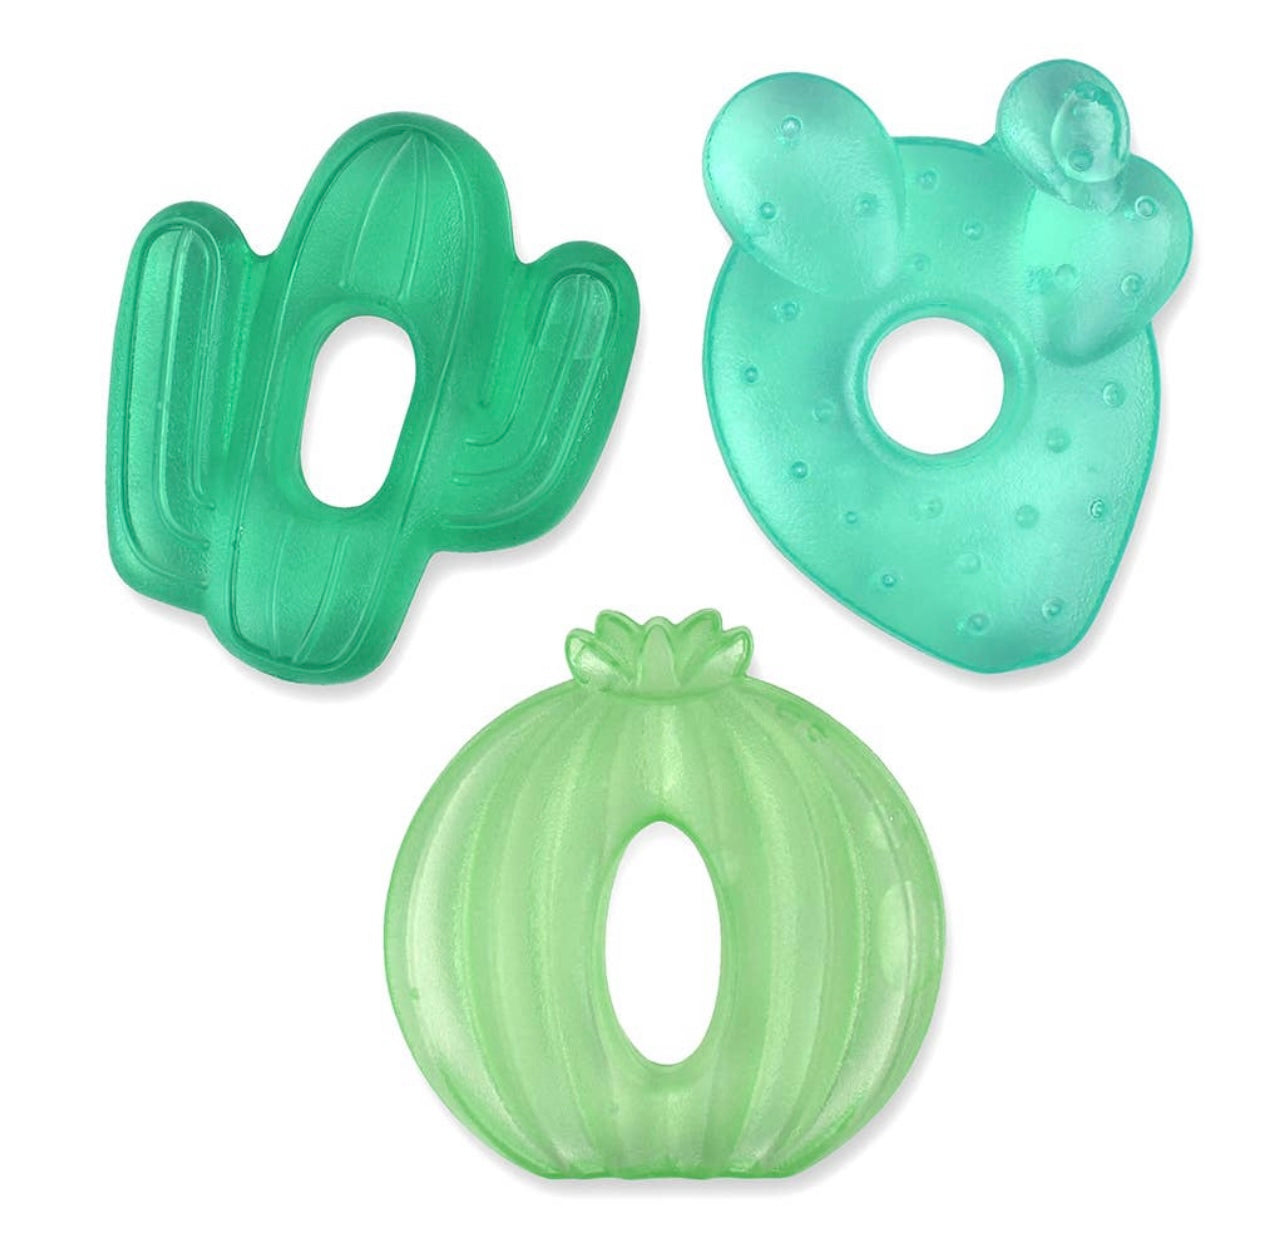 Cutie Coolers Water Filled Teethers (3 colors)